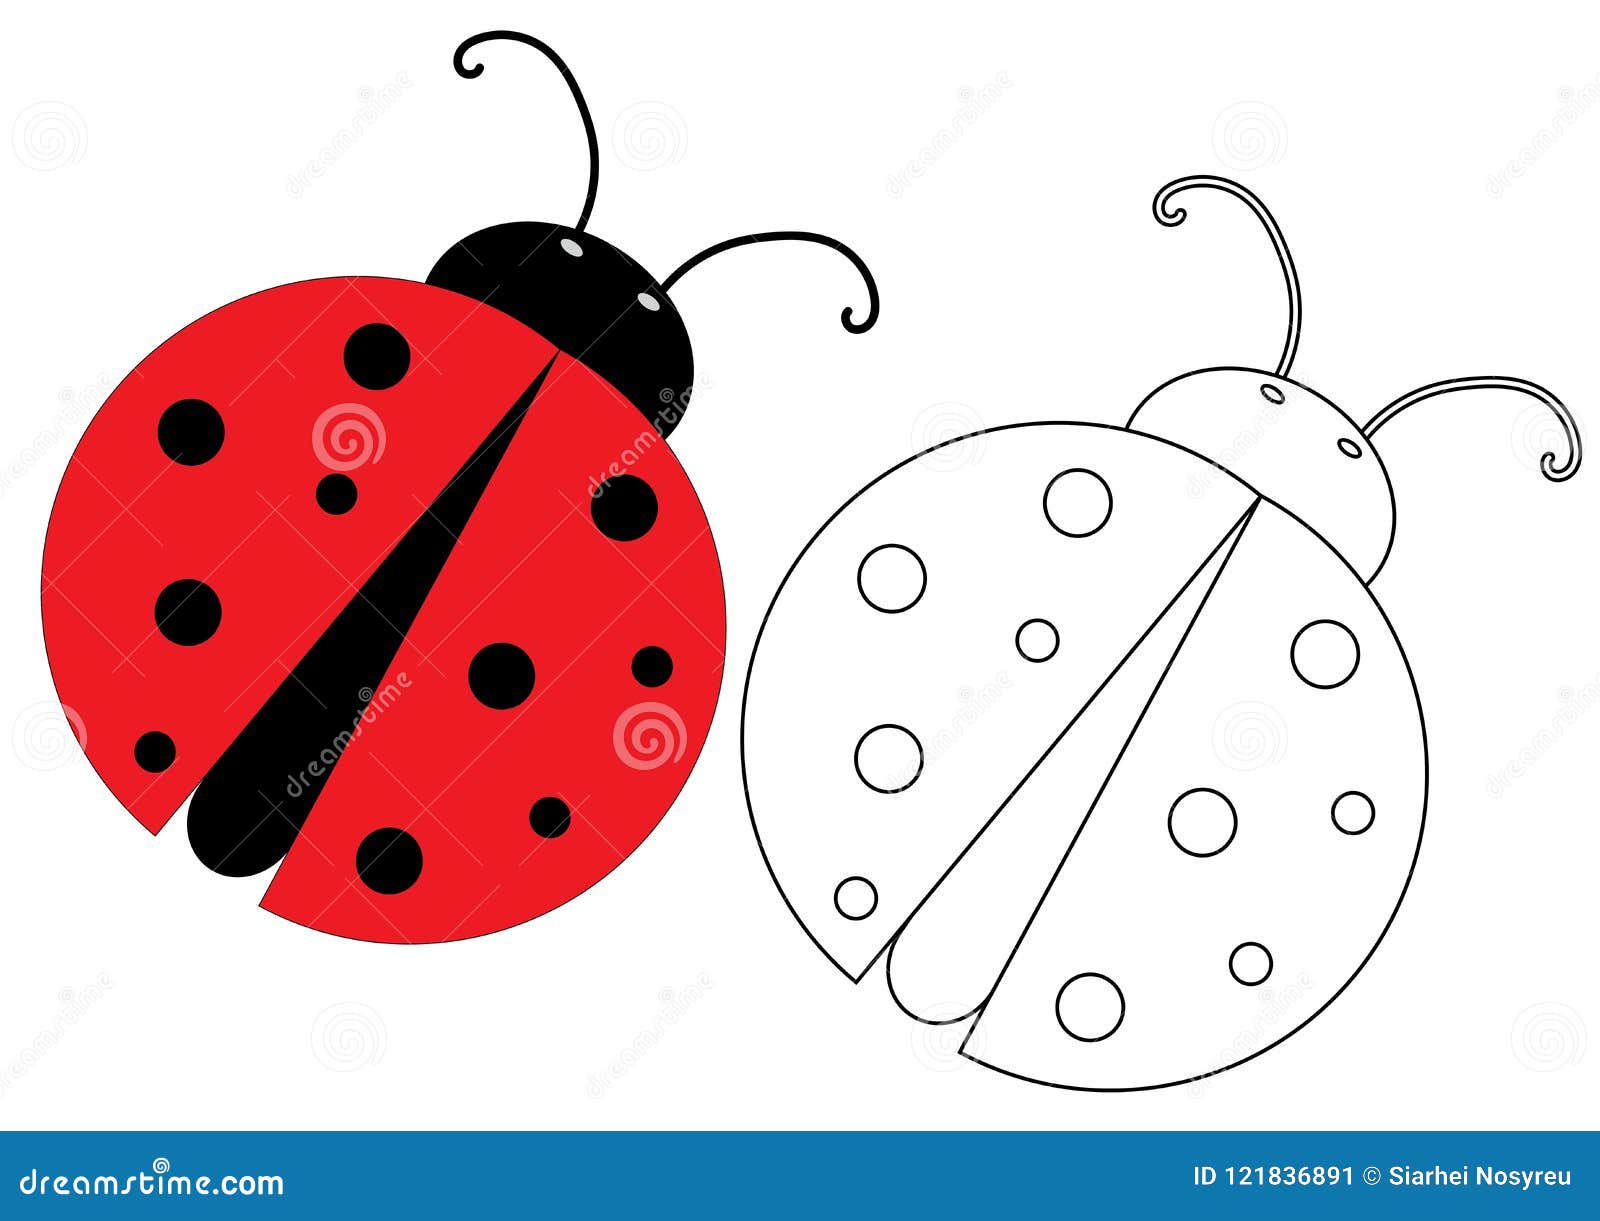 Ladybug. Coloring Page, Game for Kids. Vector Illustration. Stock ...